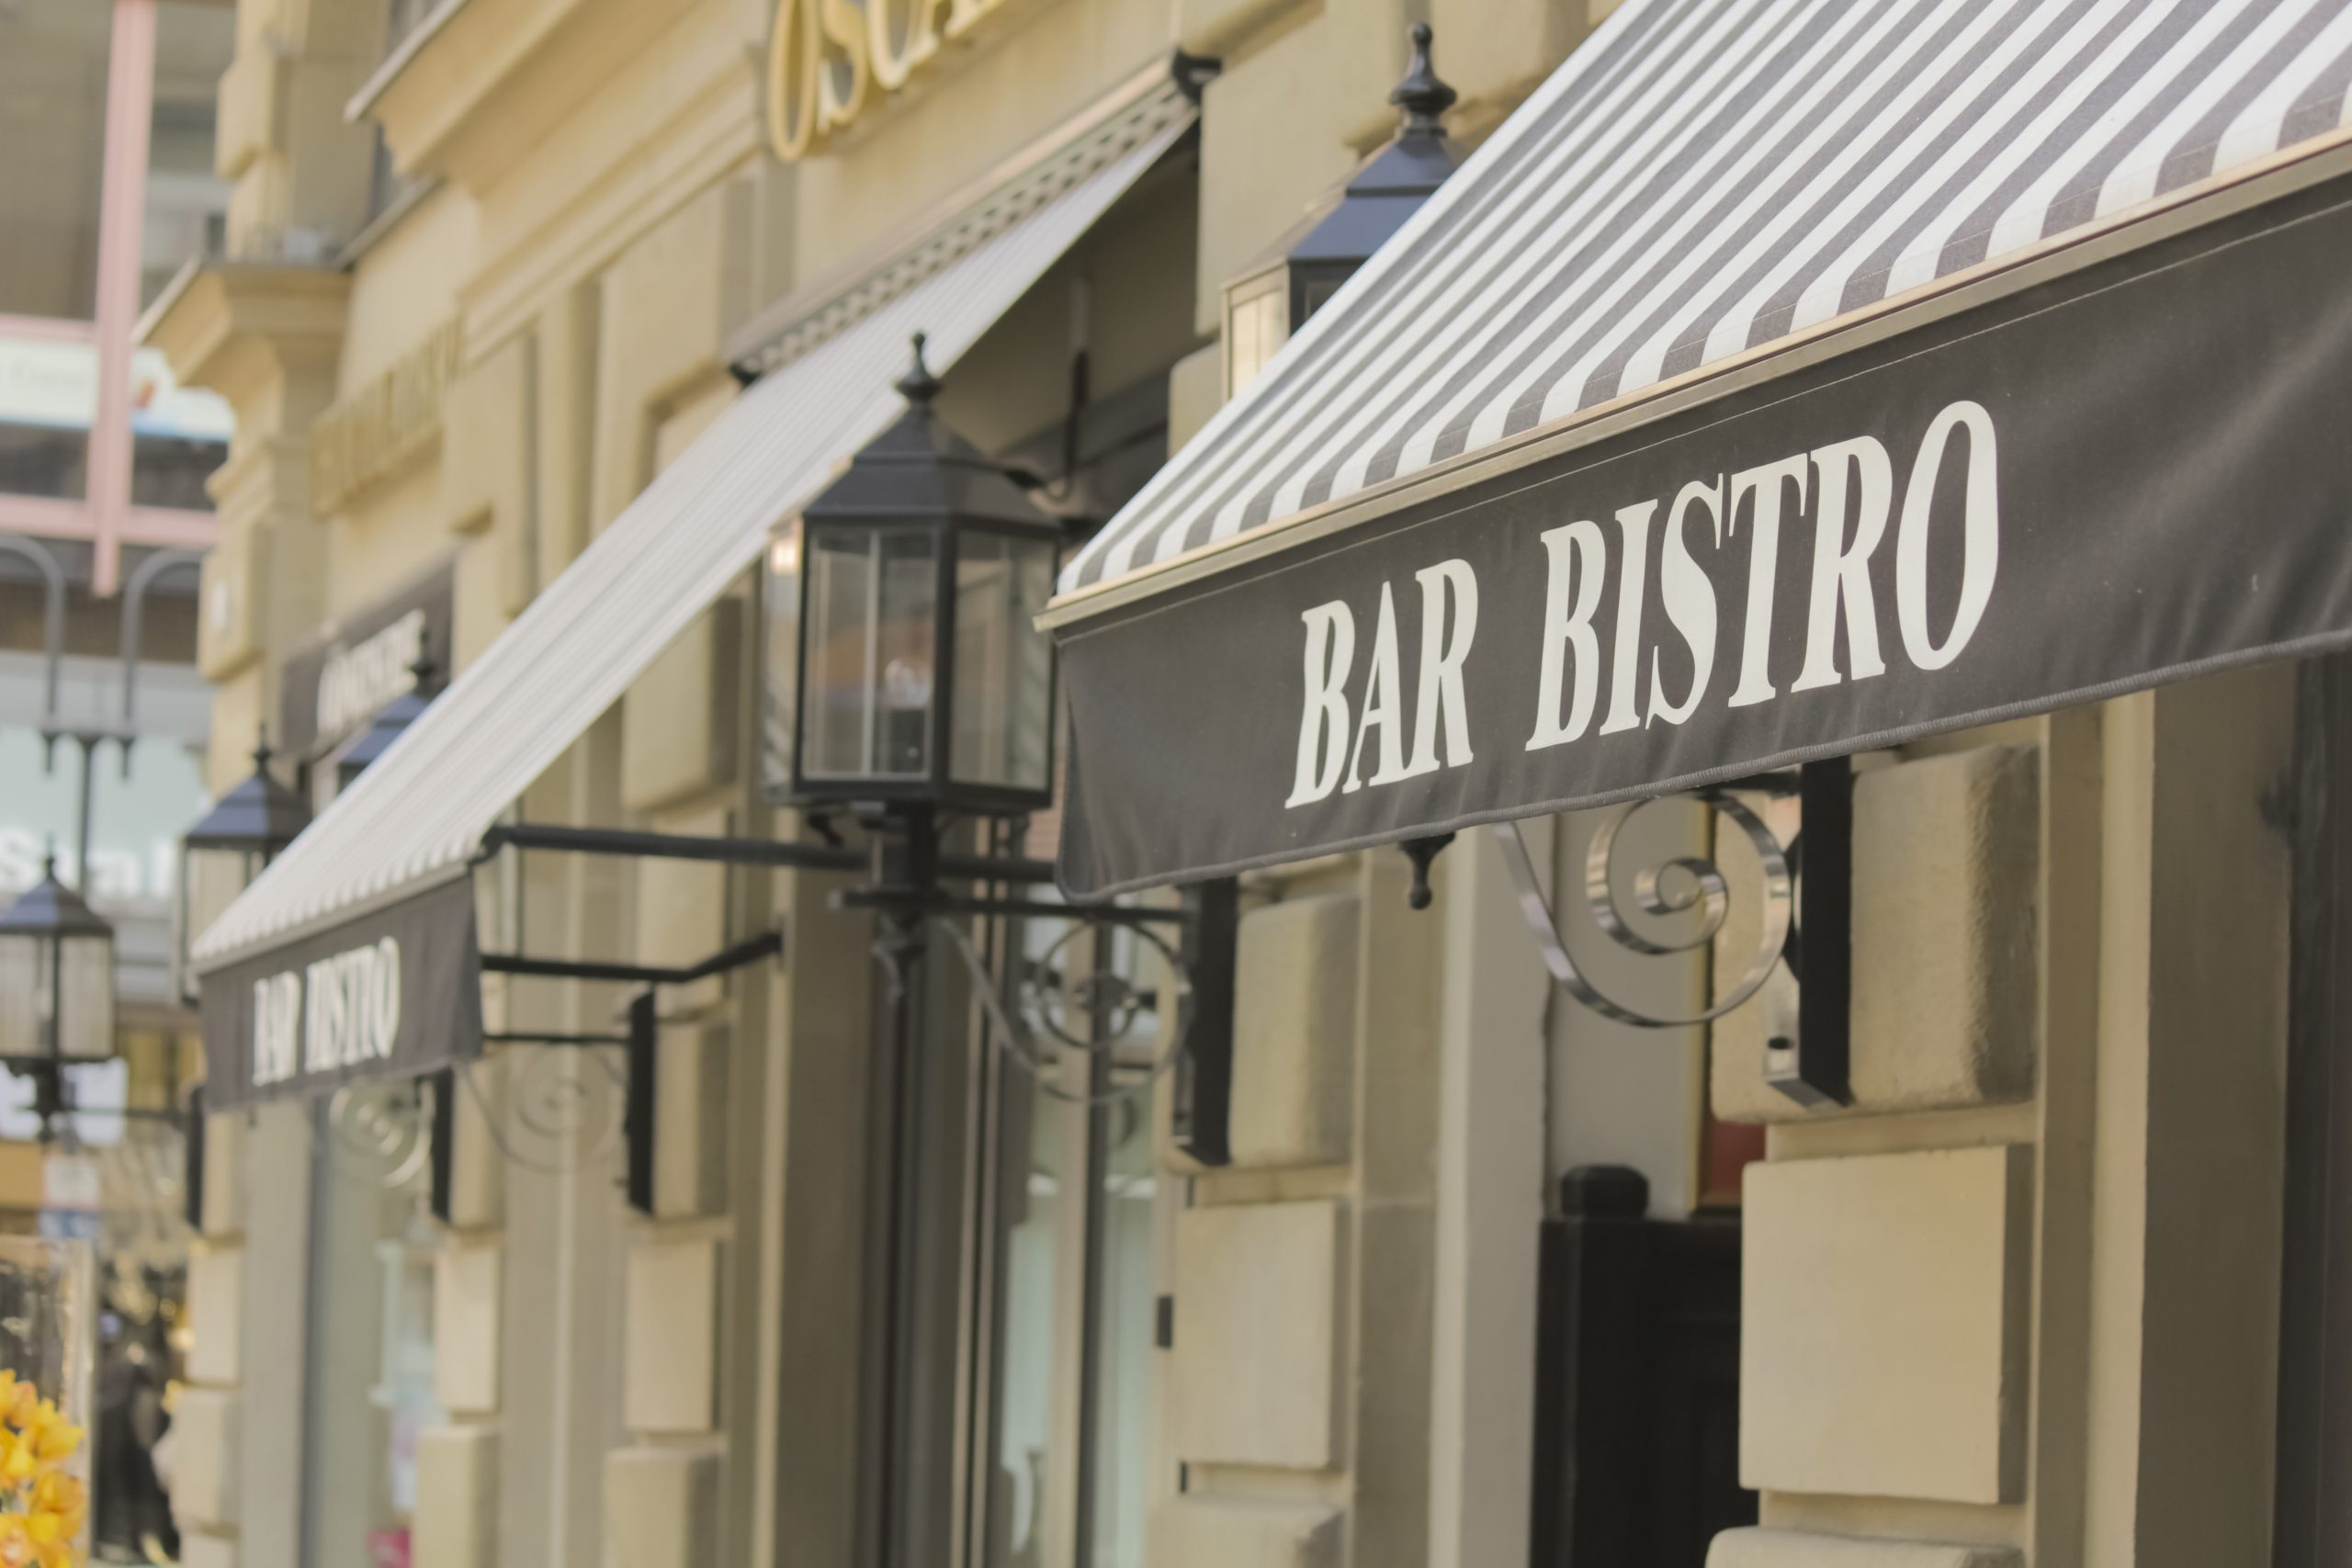 See What Awnings Can Do For Your Restaurant